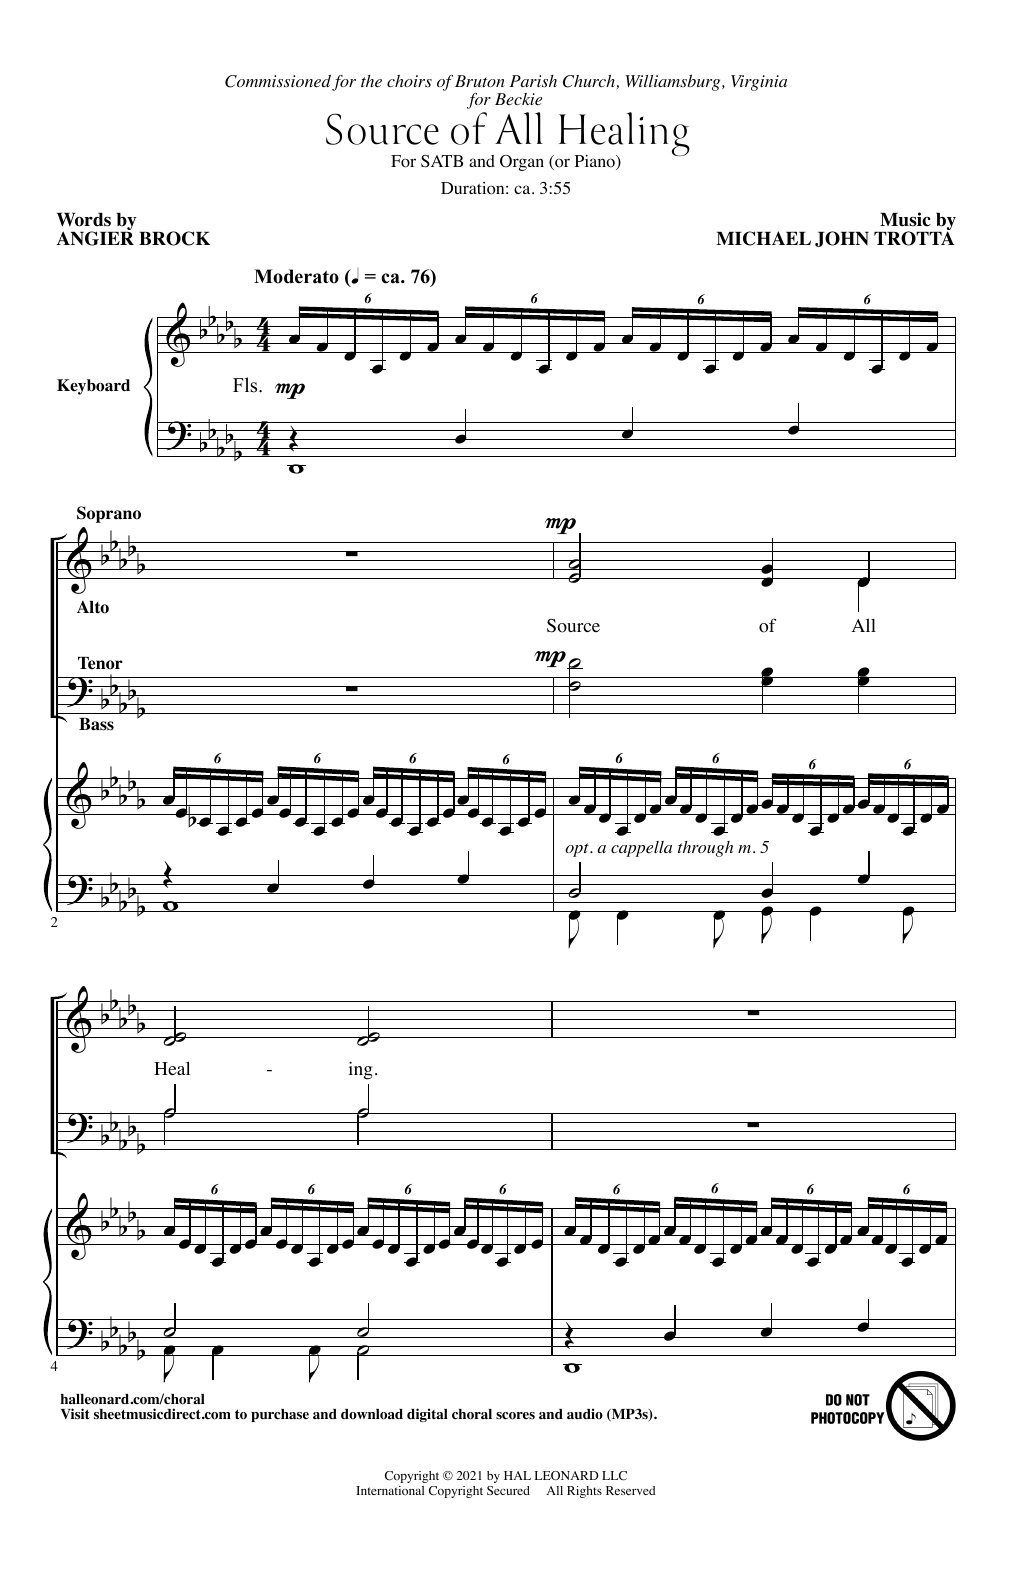 Download Angier Brock and Michael John Trotta Source Of All Healing Sheet Music